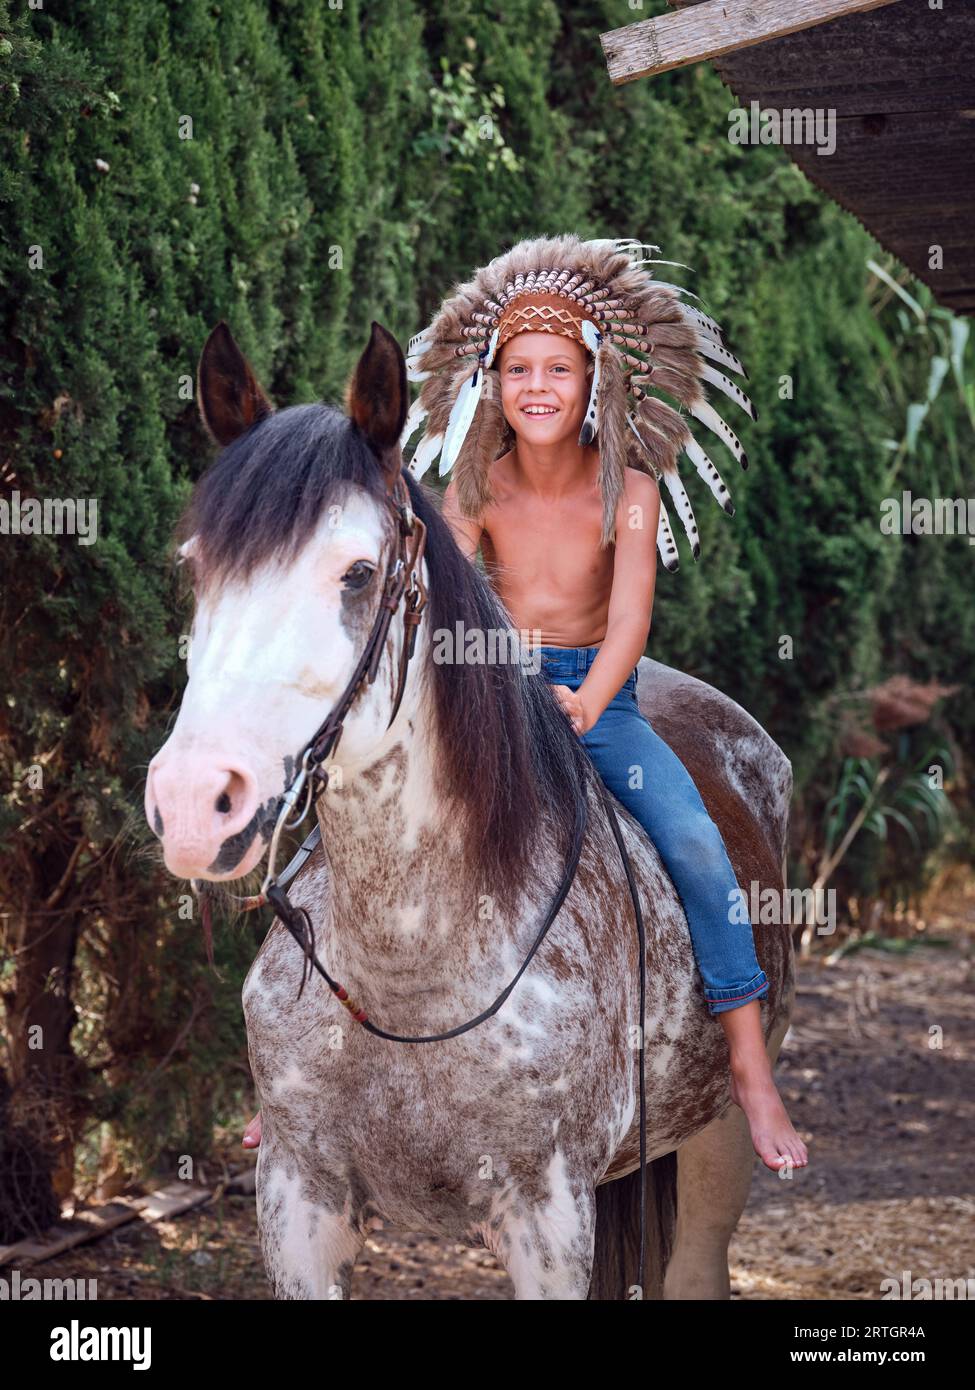 Full body of smiling kid in traditional Indian headwear and jeans sitting on gray horse and holding reins while riding in green park Stock Photo